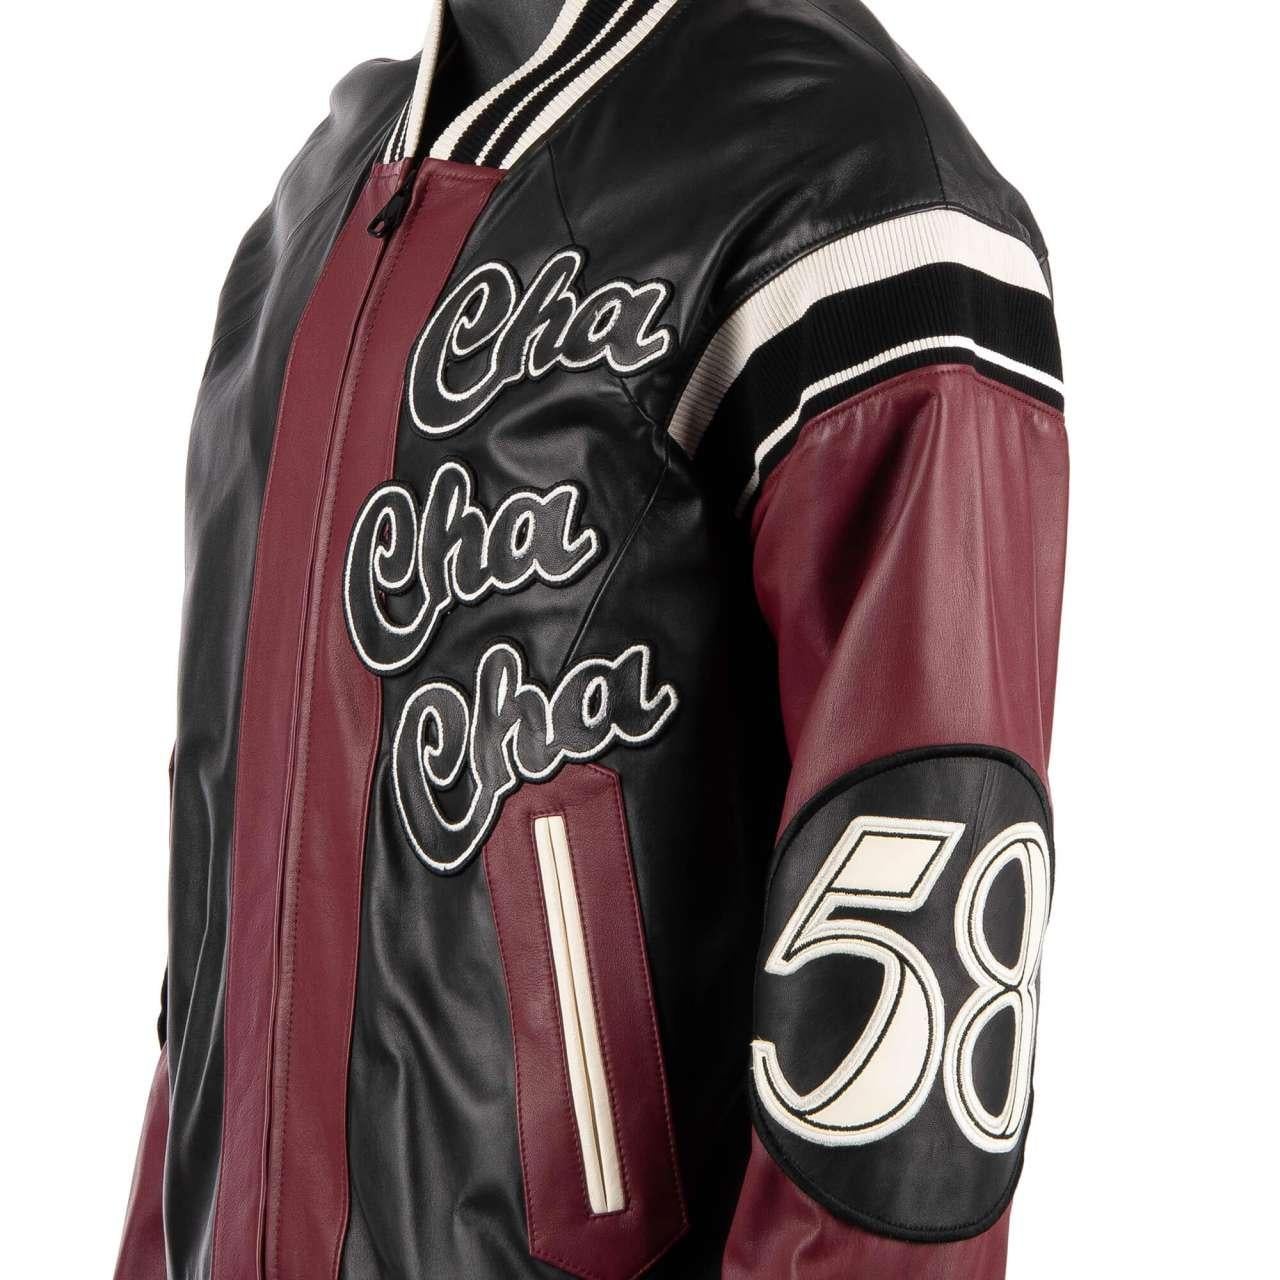 D&G Club Lounge Cello Embroidered Bomber Leather Jacket Black Bordeaux 52 For Sale 1